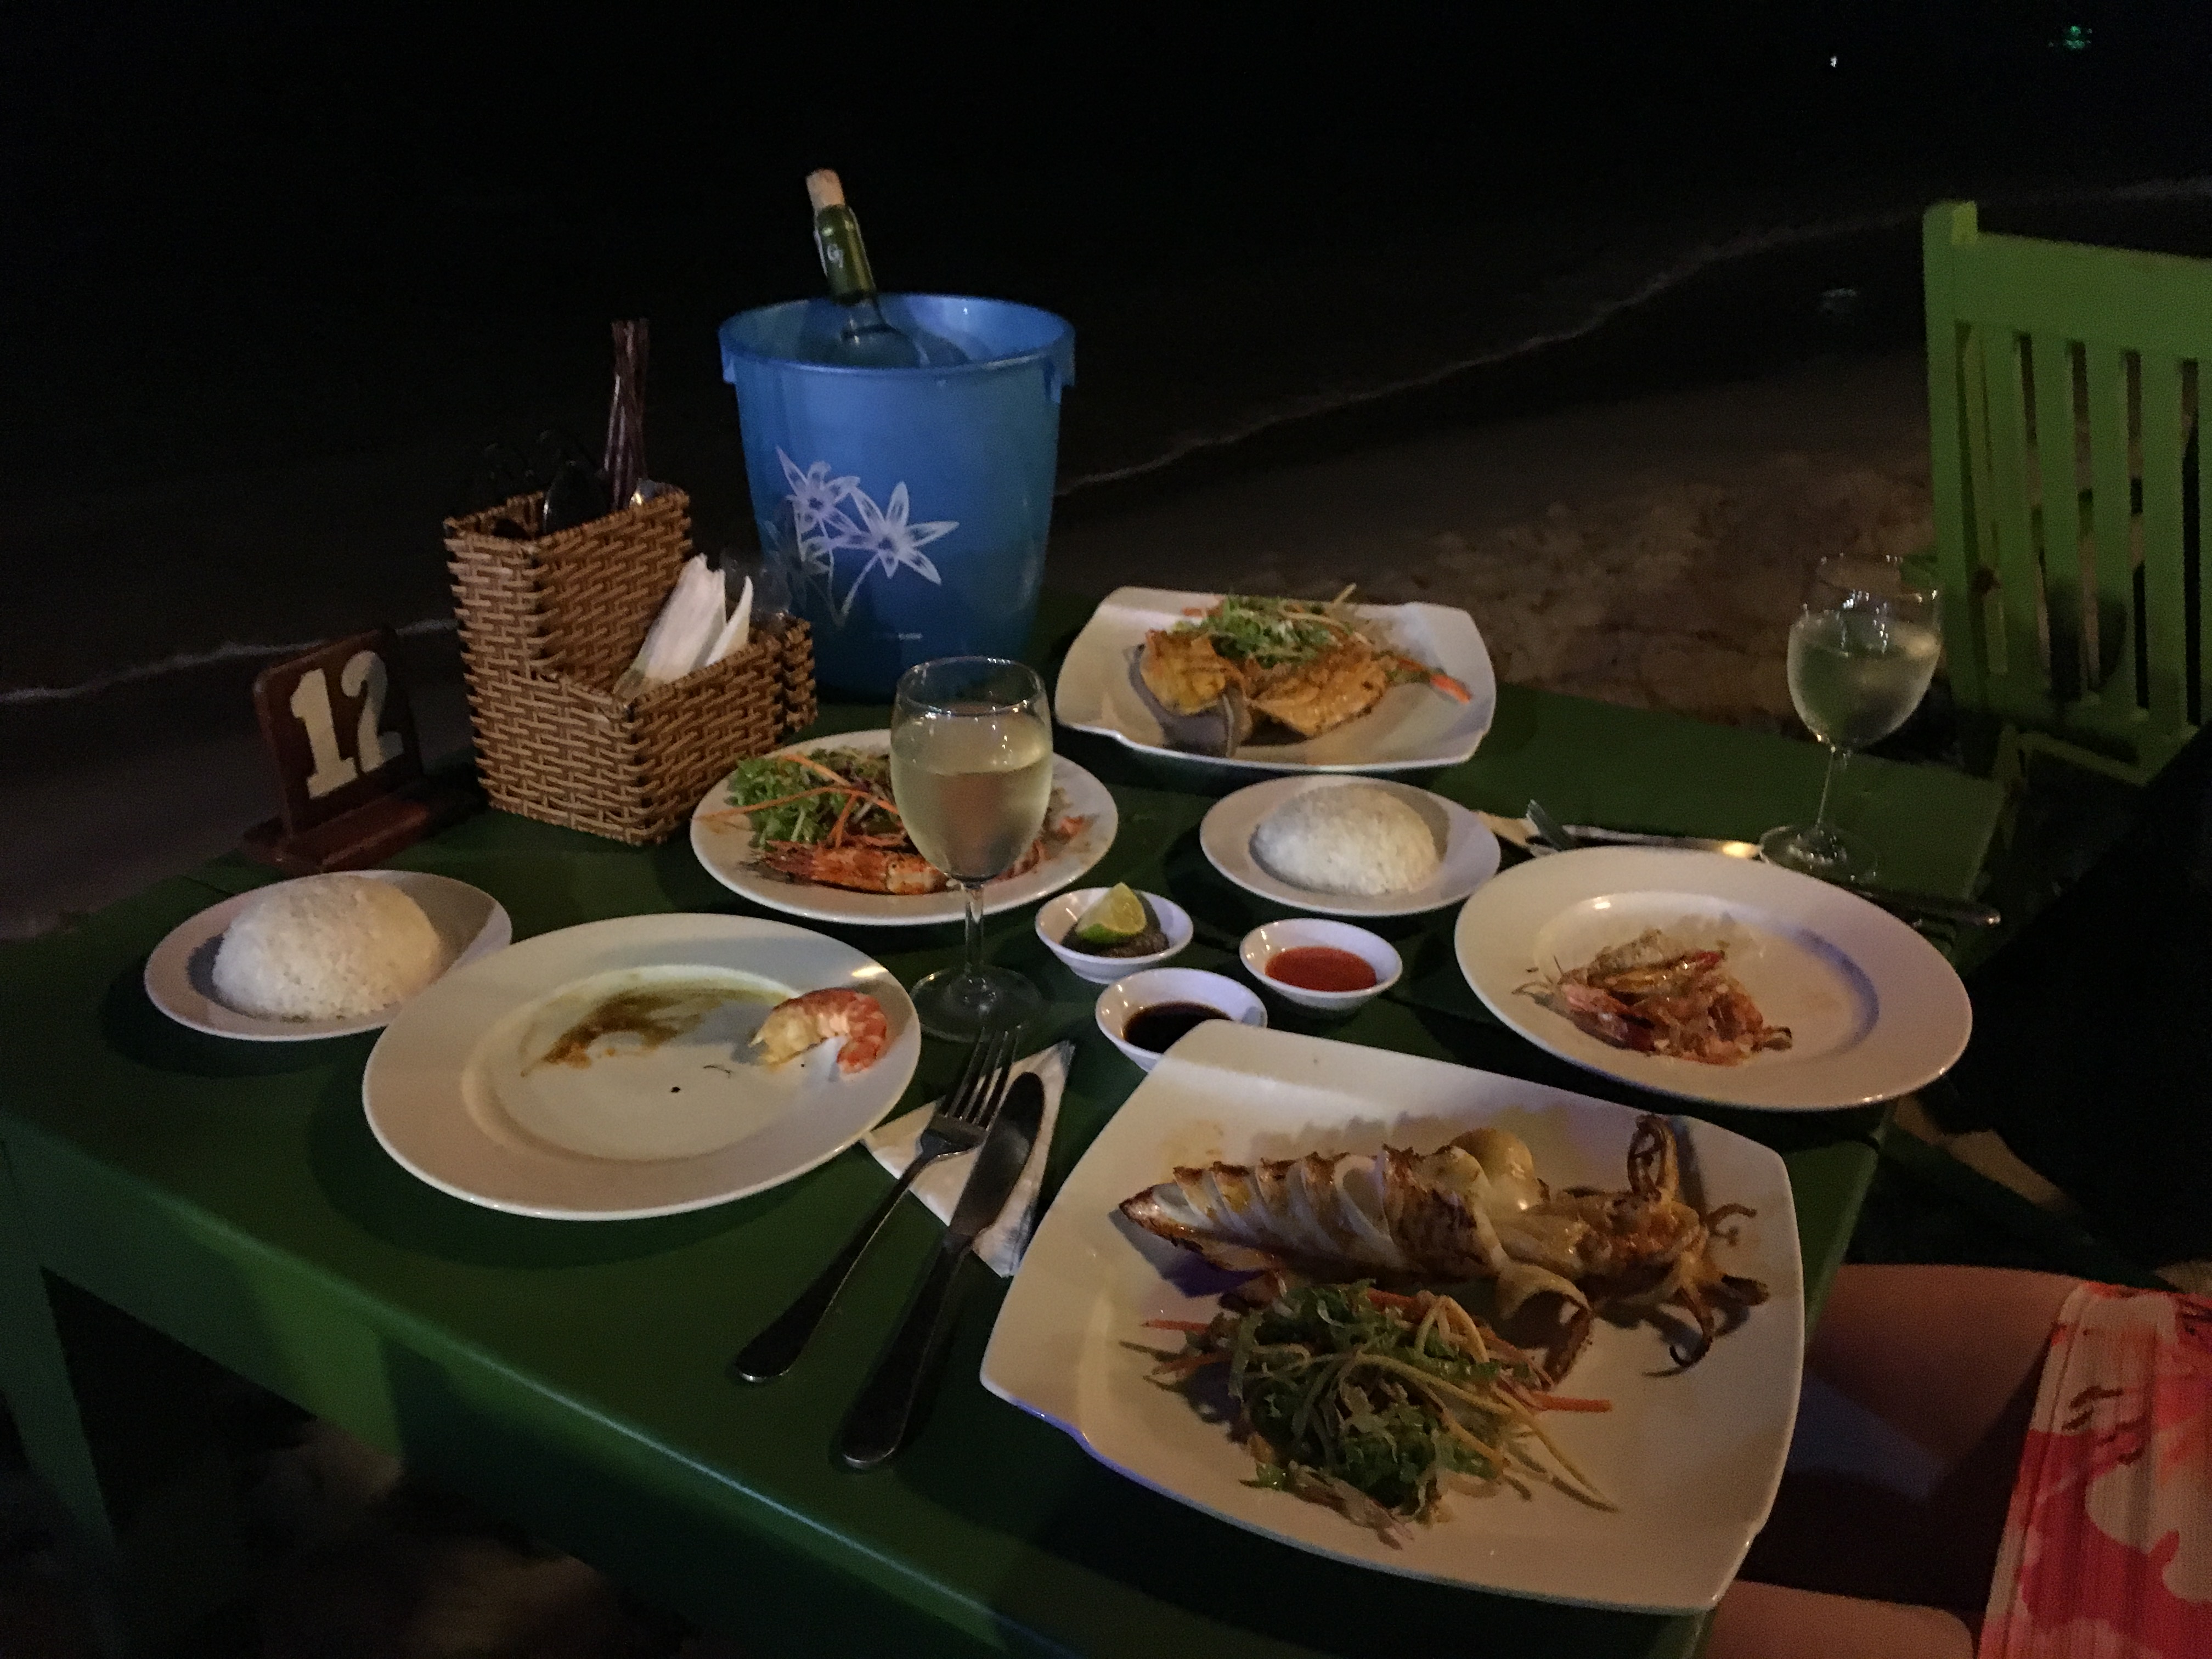 Dinner on the beach at Lien Hiep Thanh in Phu Quoc, Vietnam.